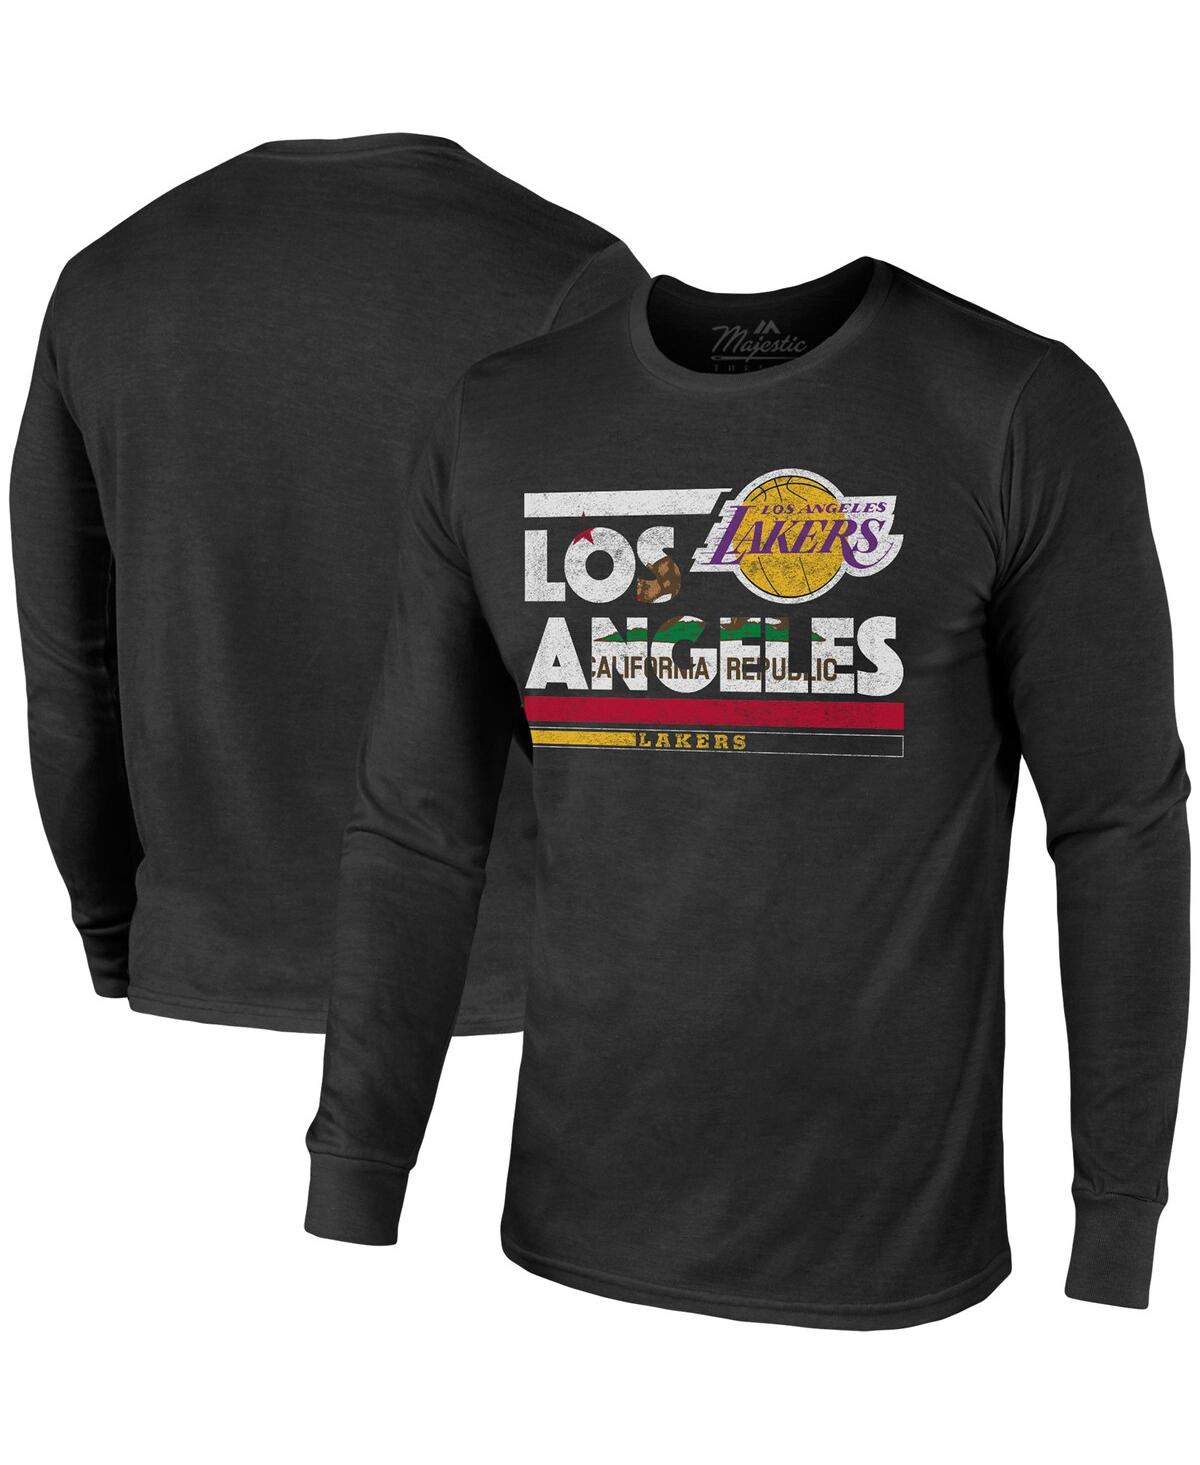 Majestic Men's  Threads Black Los Angeles Lakers City And State Tri-blend Long Sleeve T-shirt